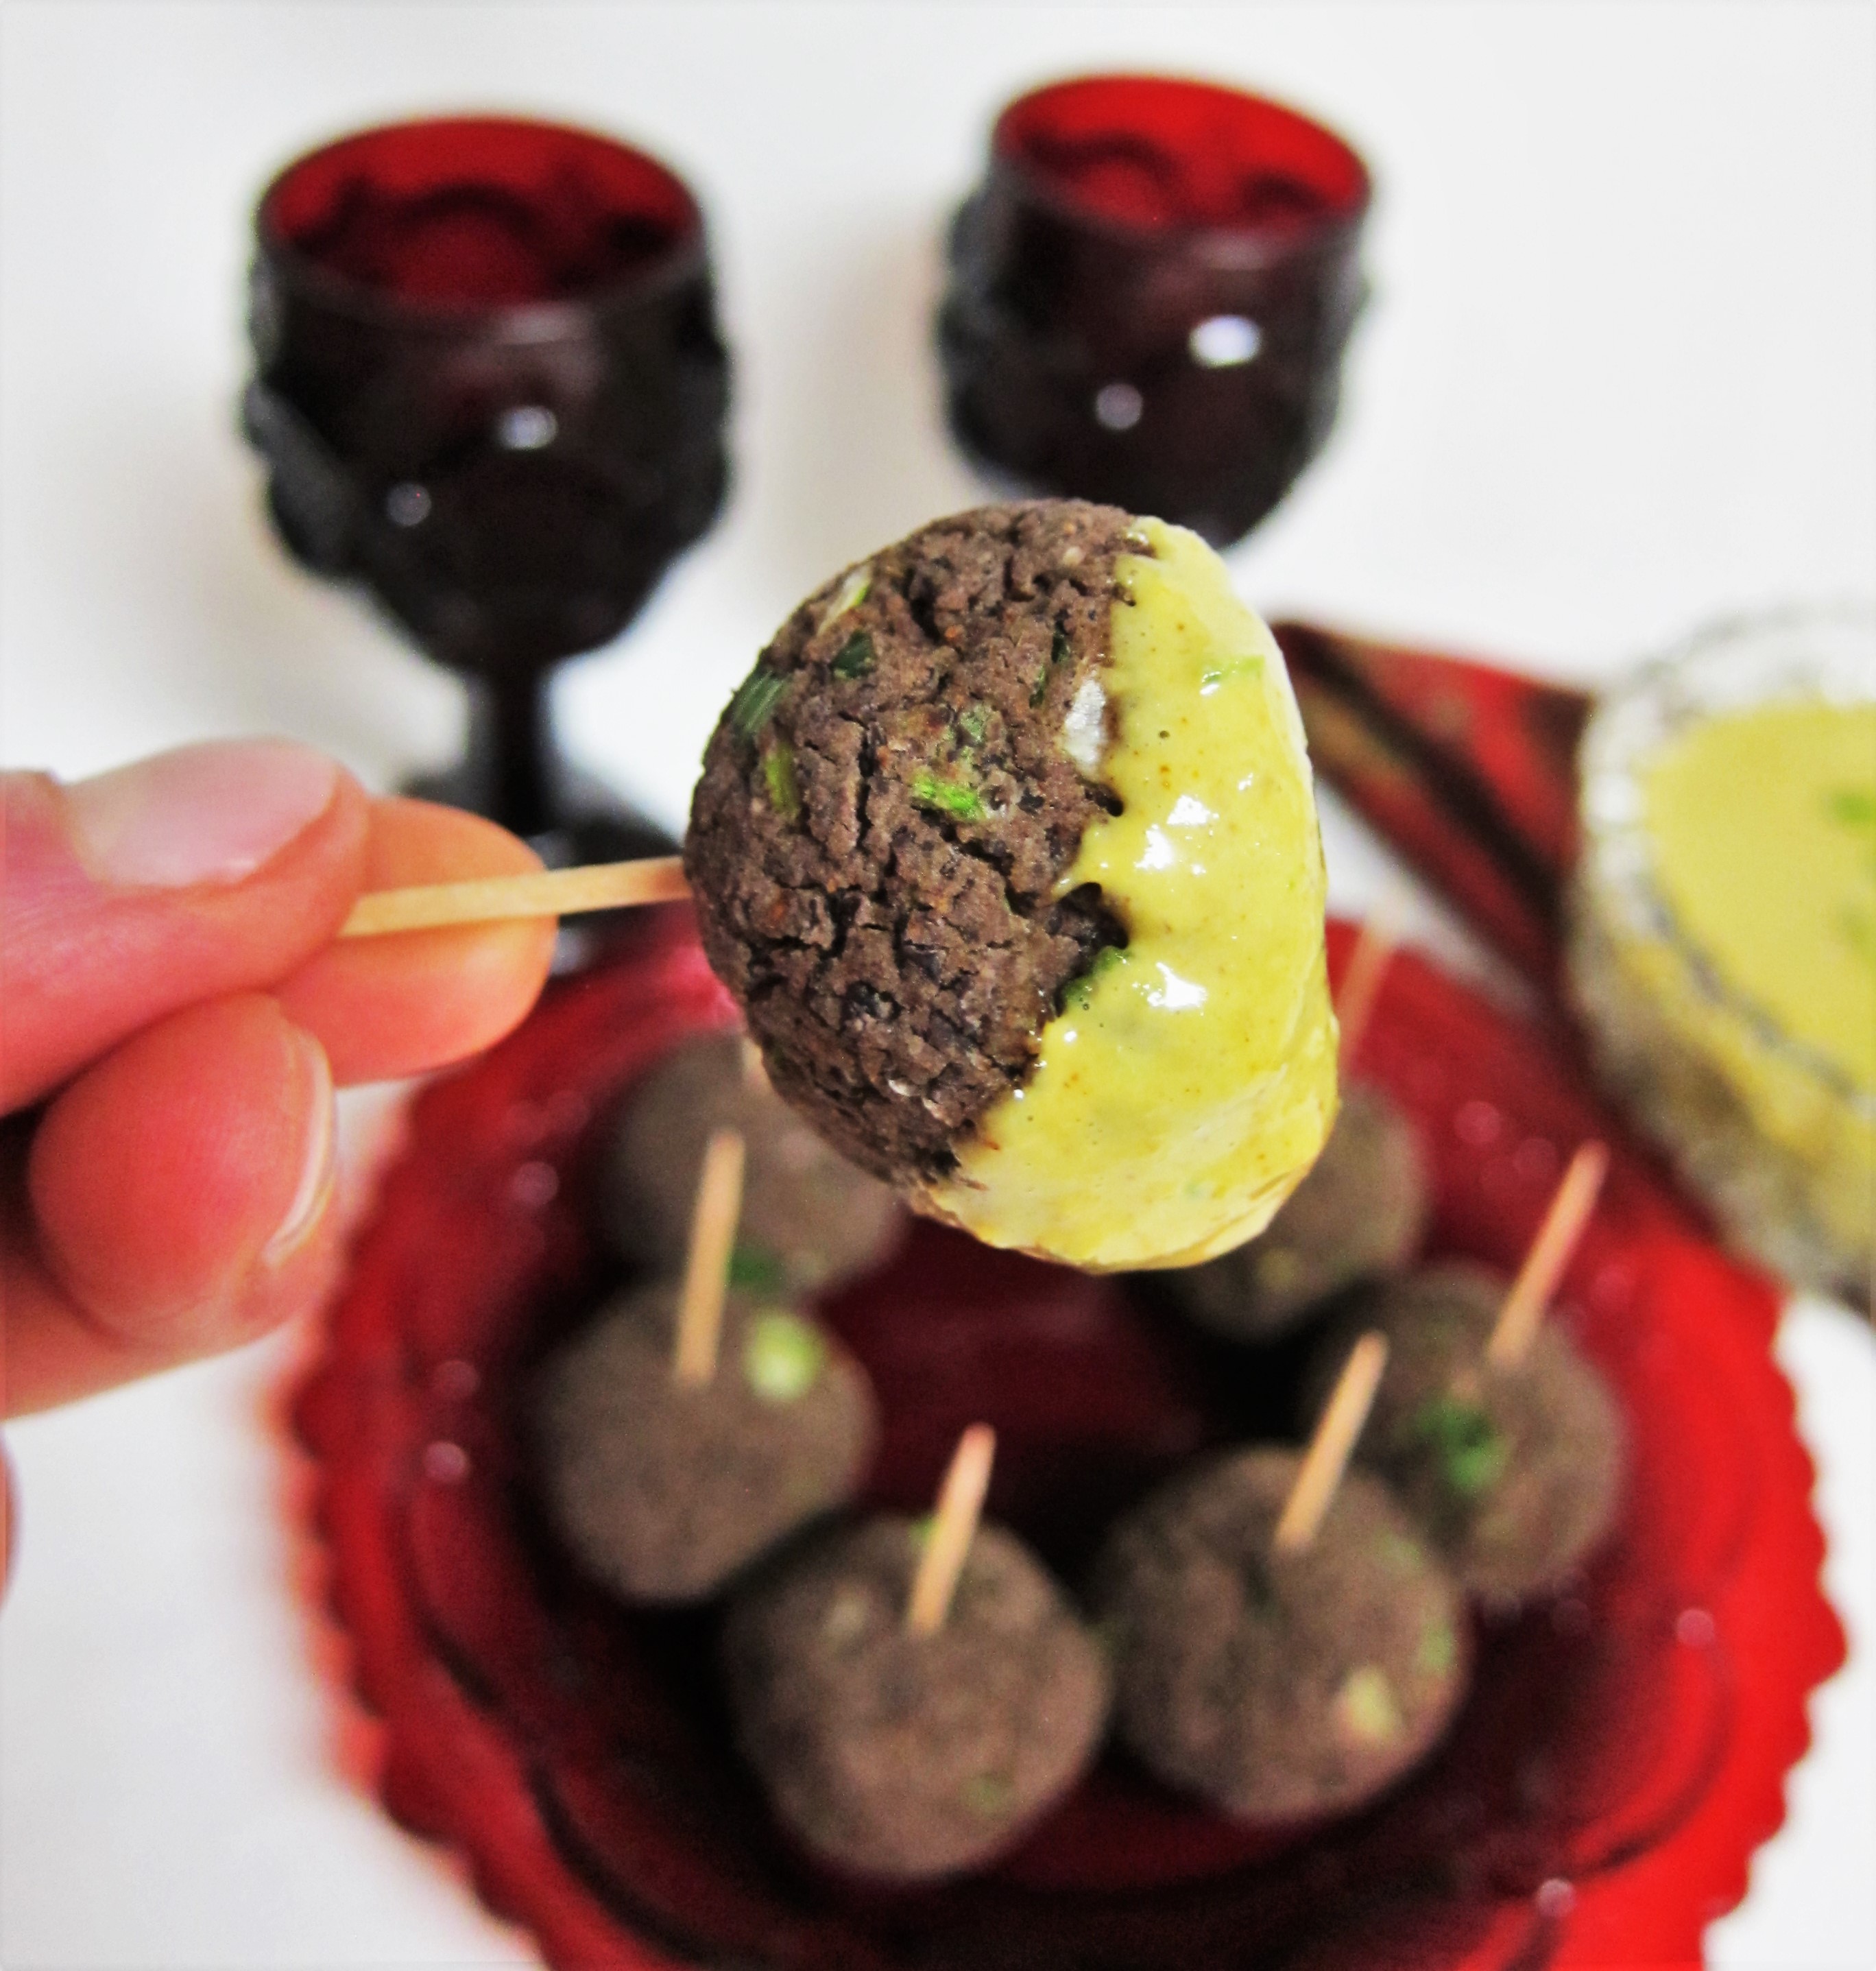 Vegan Mexican Jalapeno Black Bean “Meatballs” with Cheese Sauce